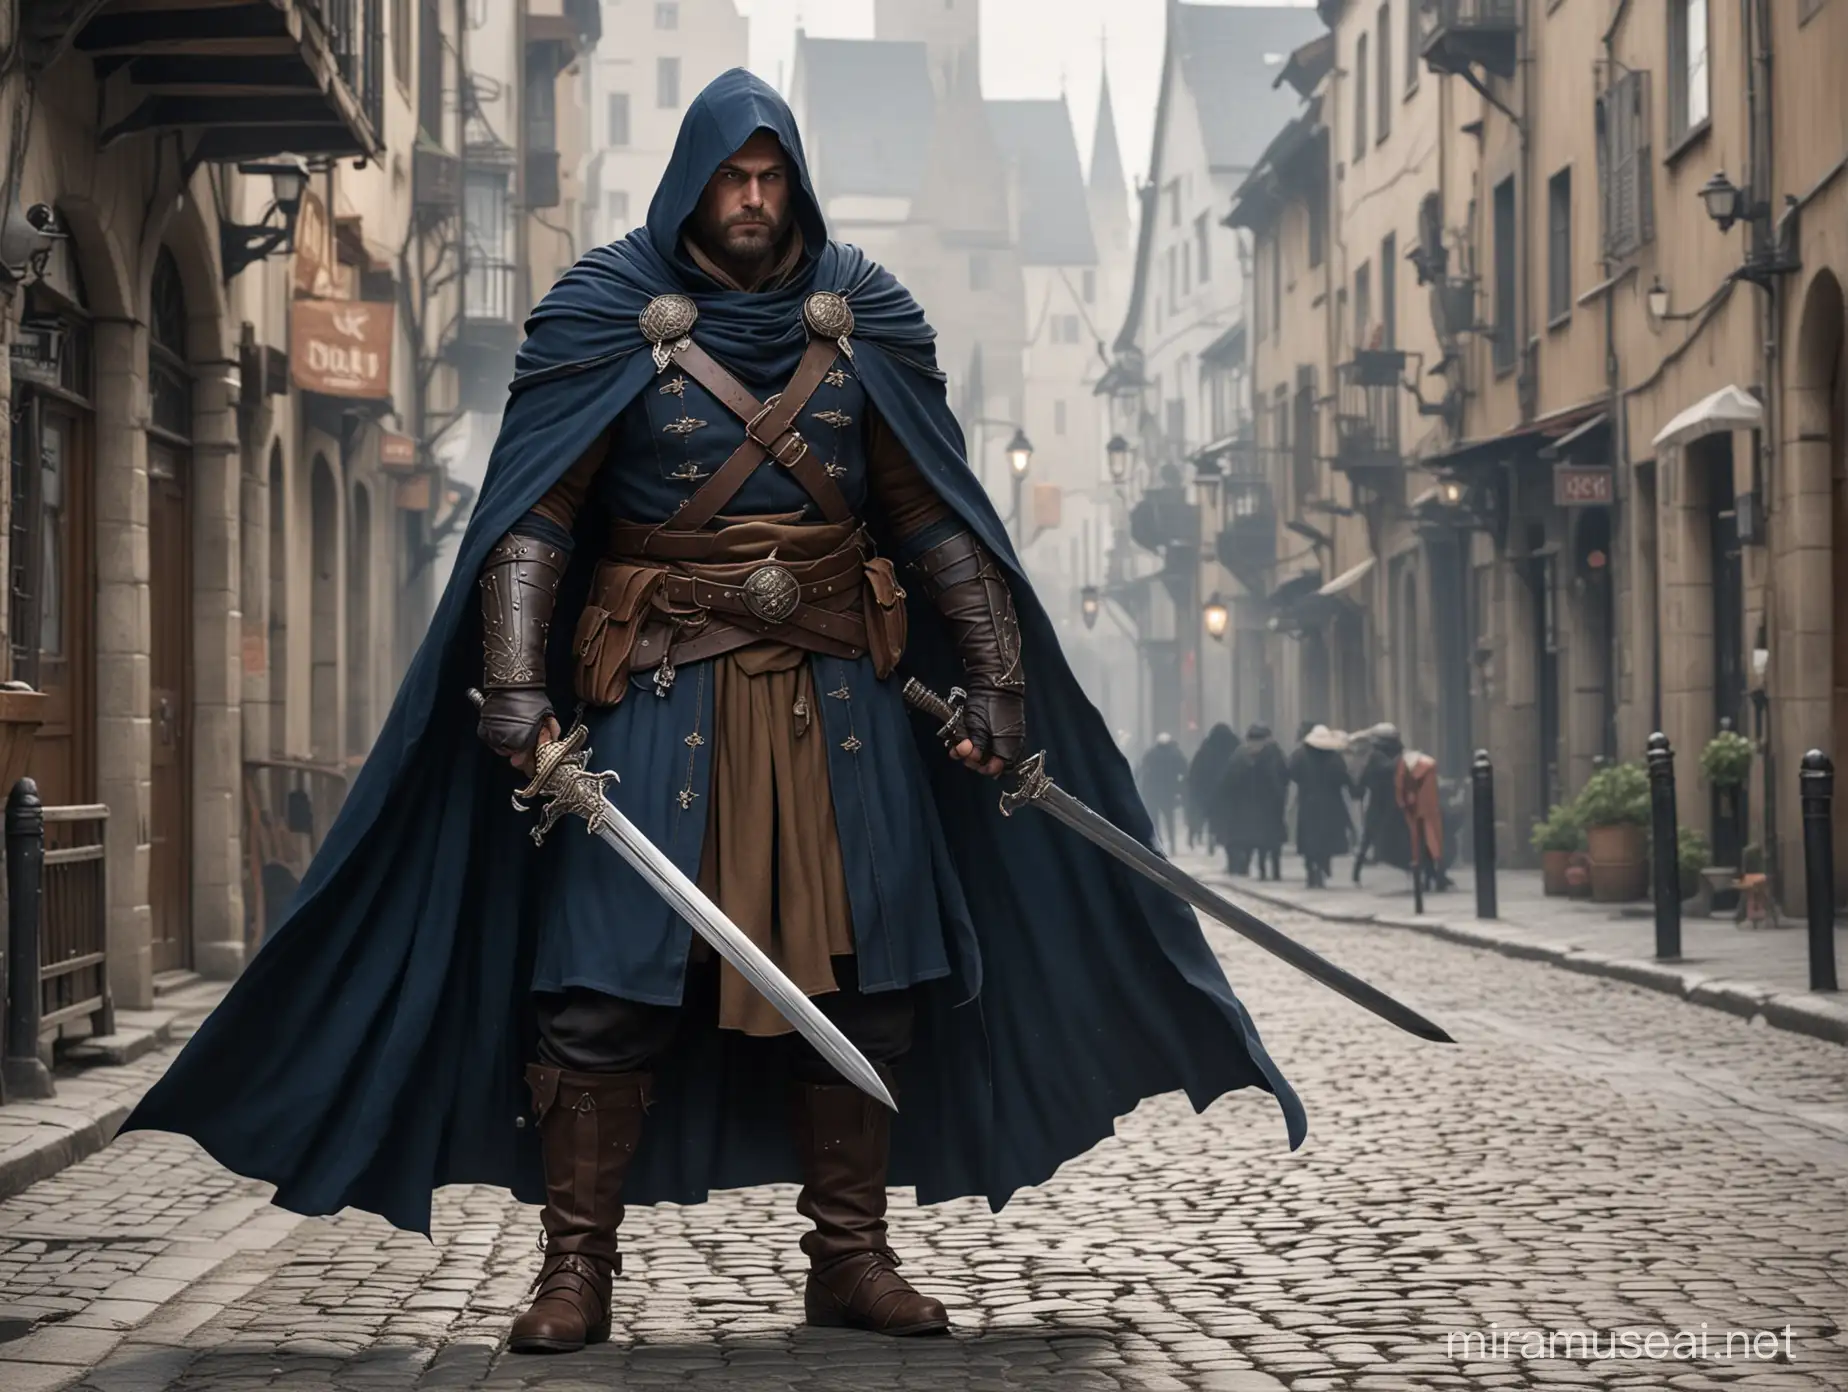 Medieval Rogue Warrior in Dark Blue Cloak and Armor with Dual Swords on Urban Street